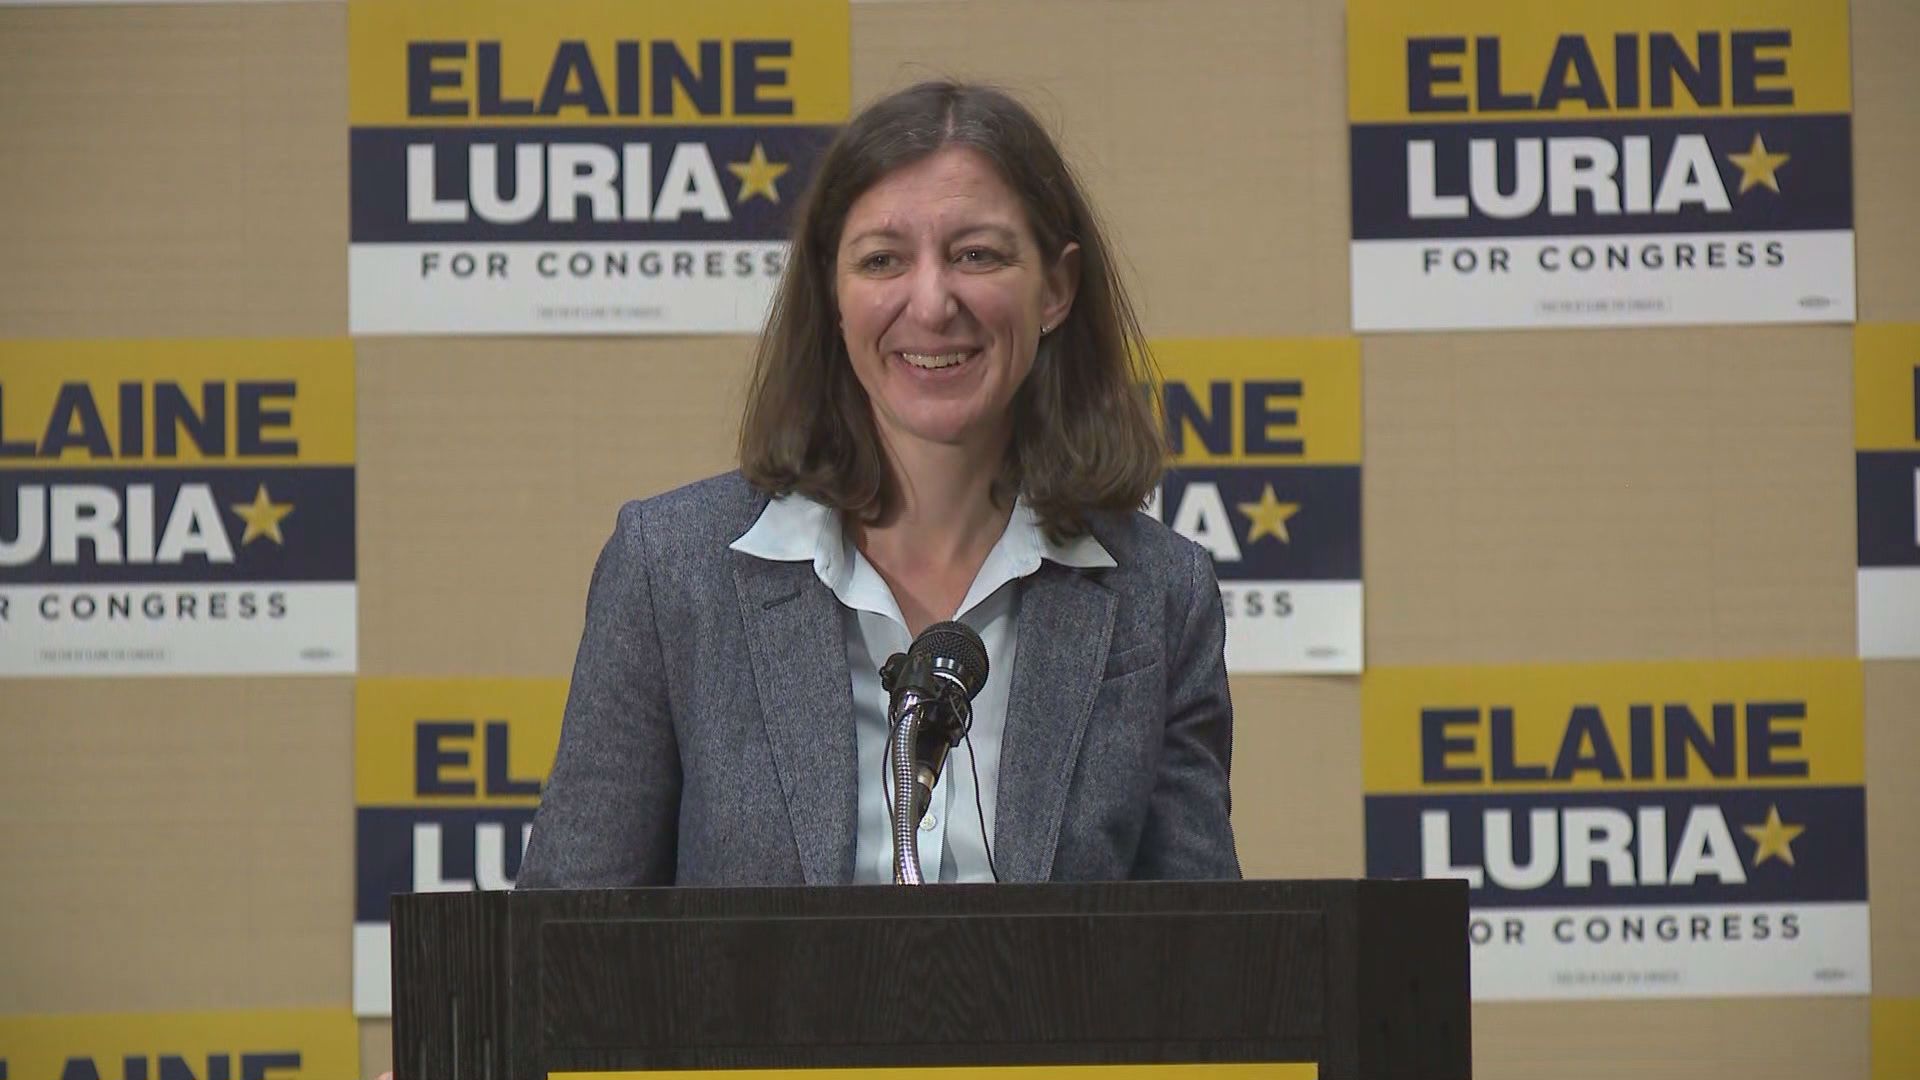 Rep. Elaine Luria was the first Democratic incumbent to lose a highly competitive House district on Tuesday, falling to State Senator Jen Kiggans.